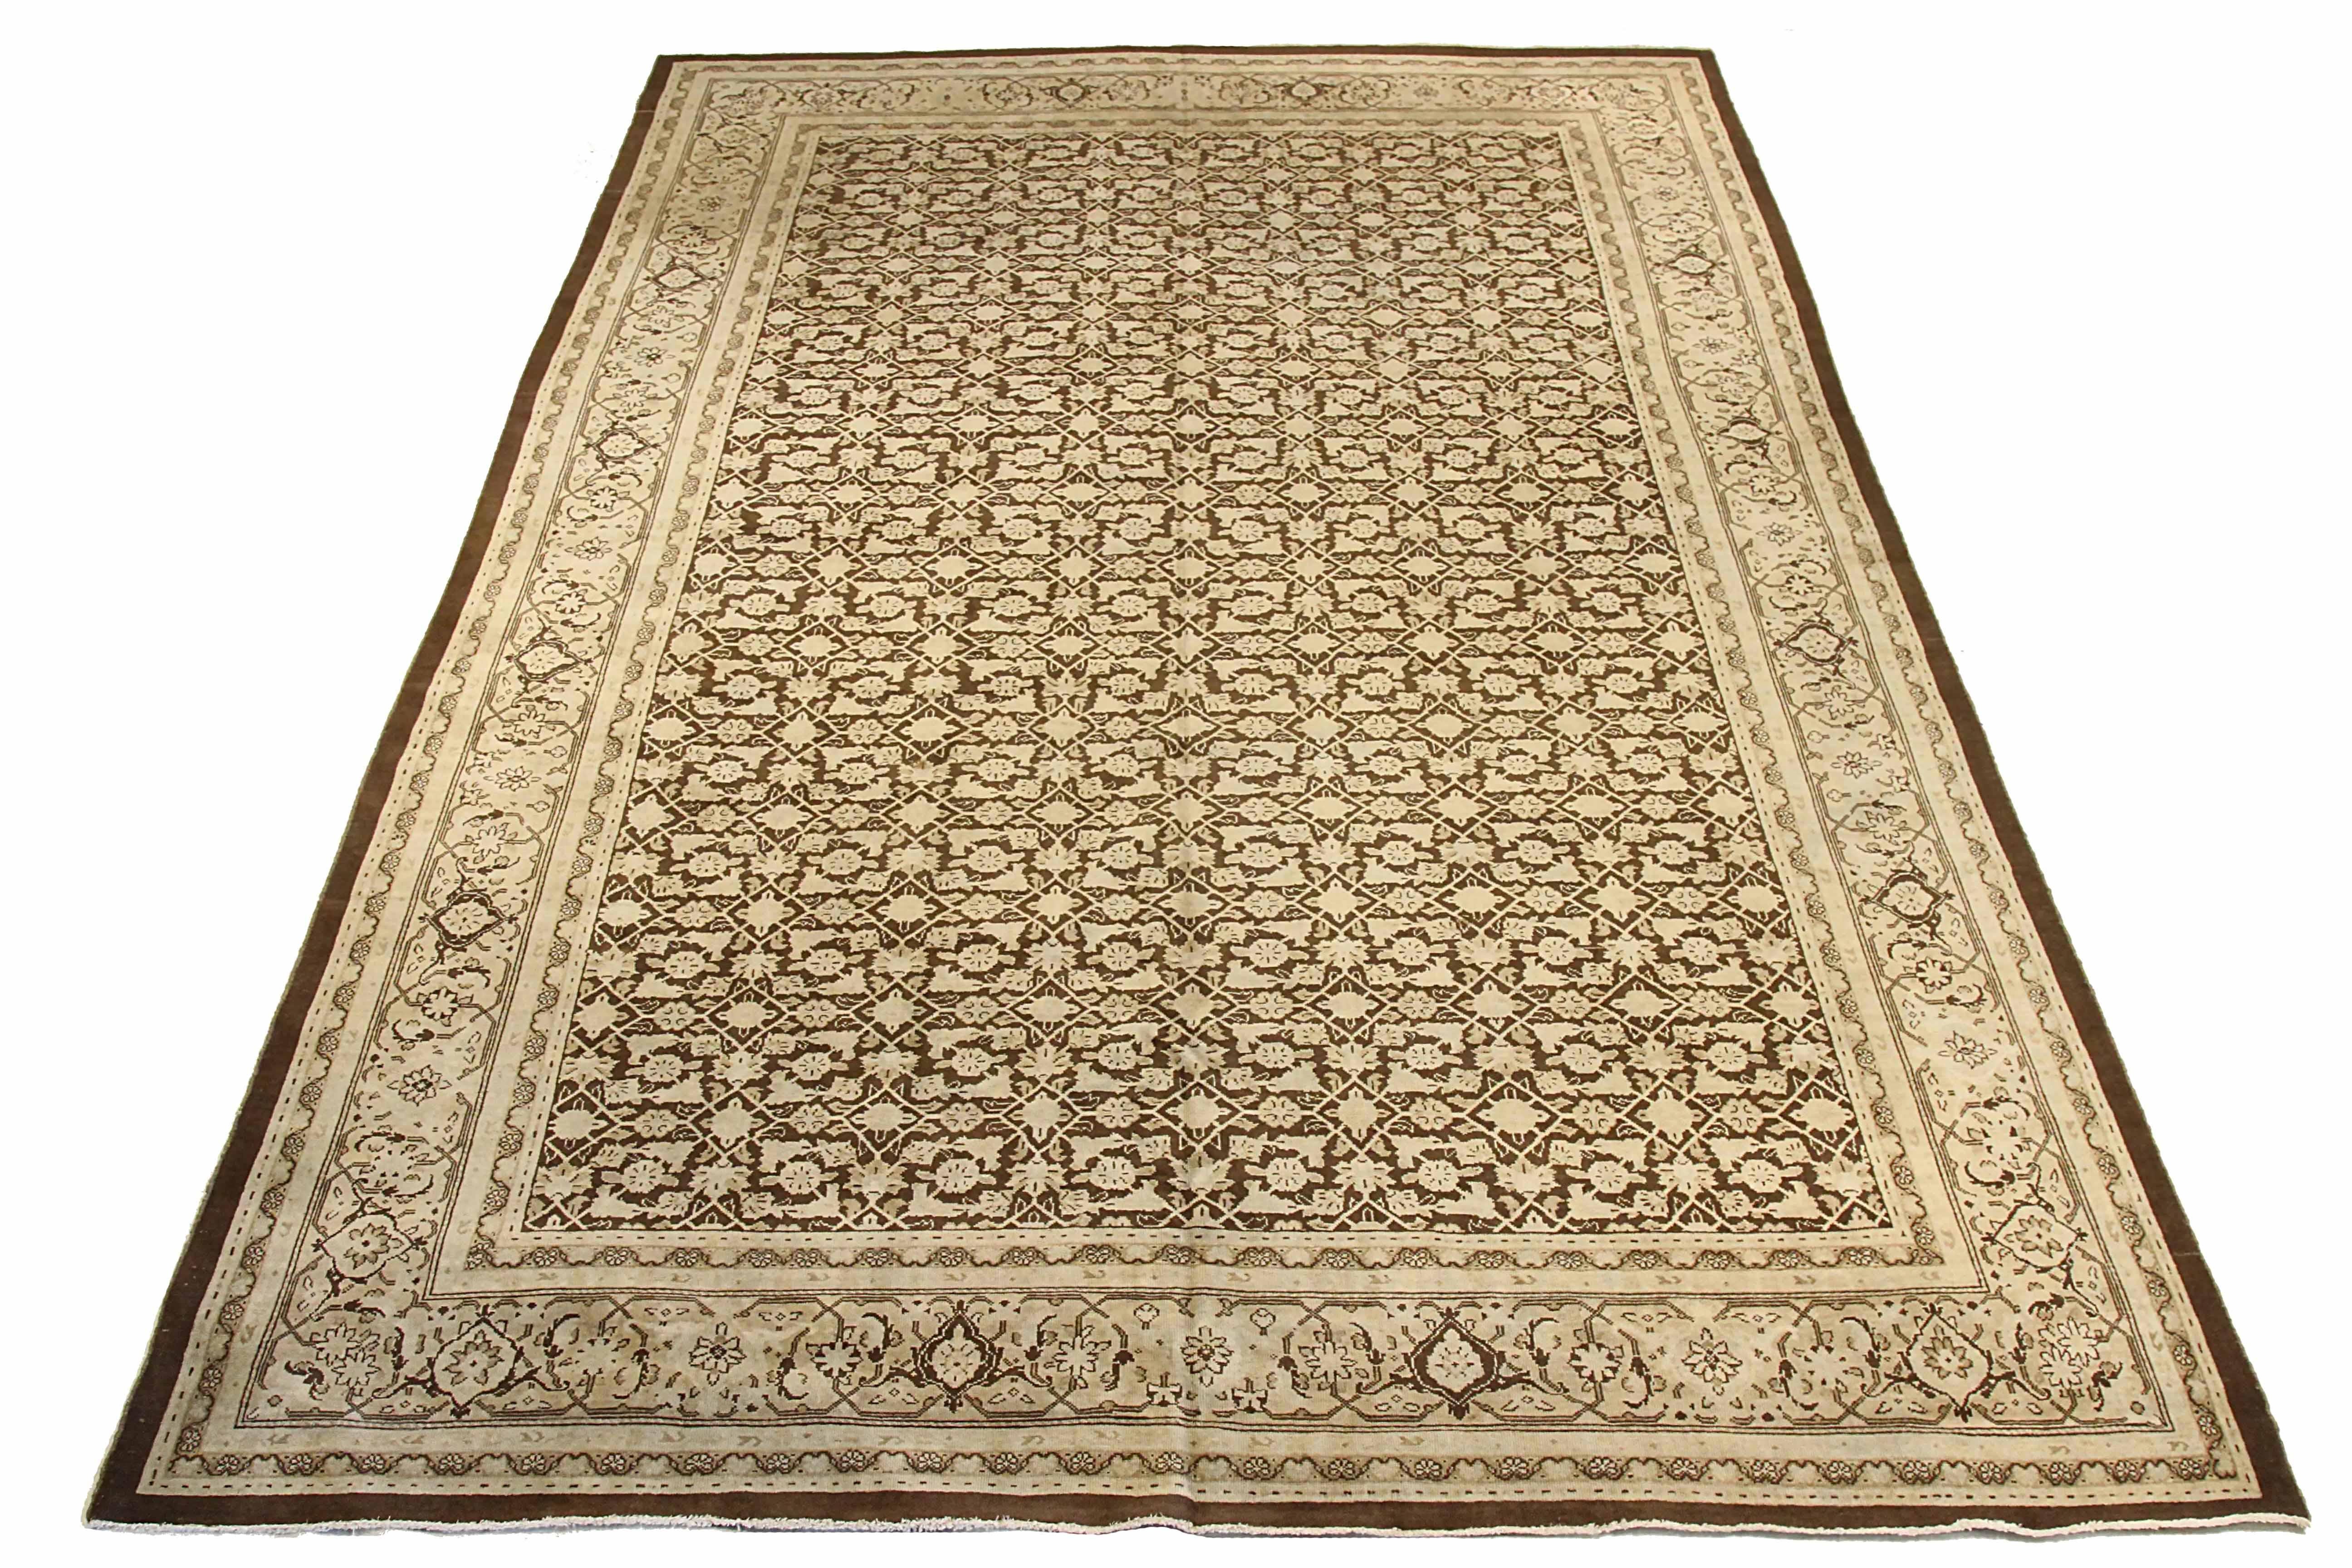 Antique Persian area rug handwoven from the finest sheep’s wool. It’s colored with all-natural vegetable dyes that are safe for humans and pets. It’s a traditional Mahal design handwoven by expert artisans. It’s a lovely area rug that can be